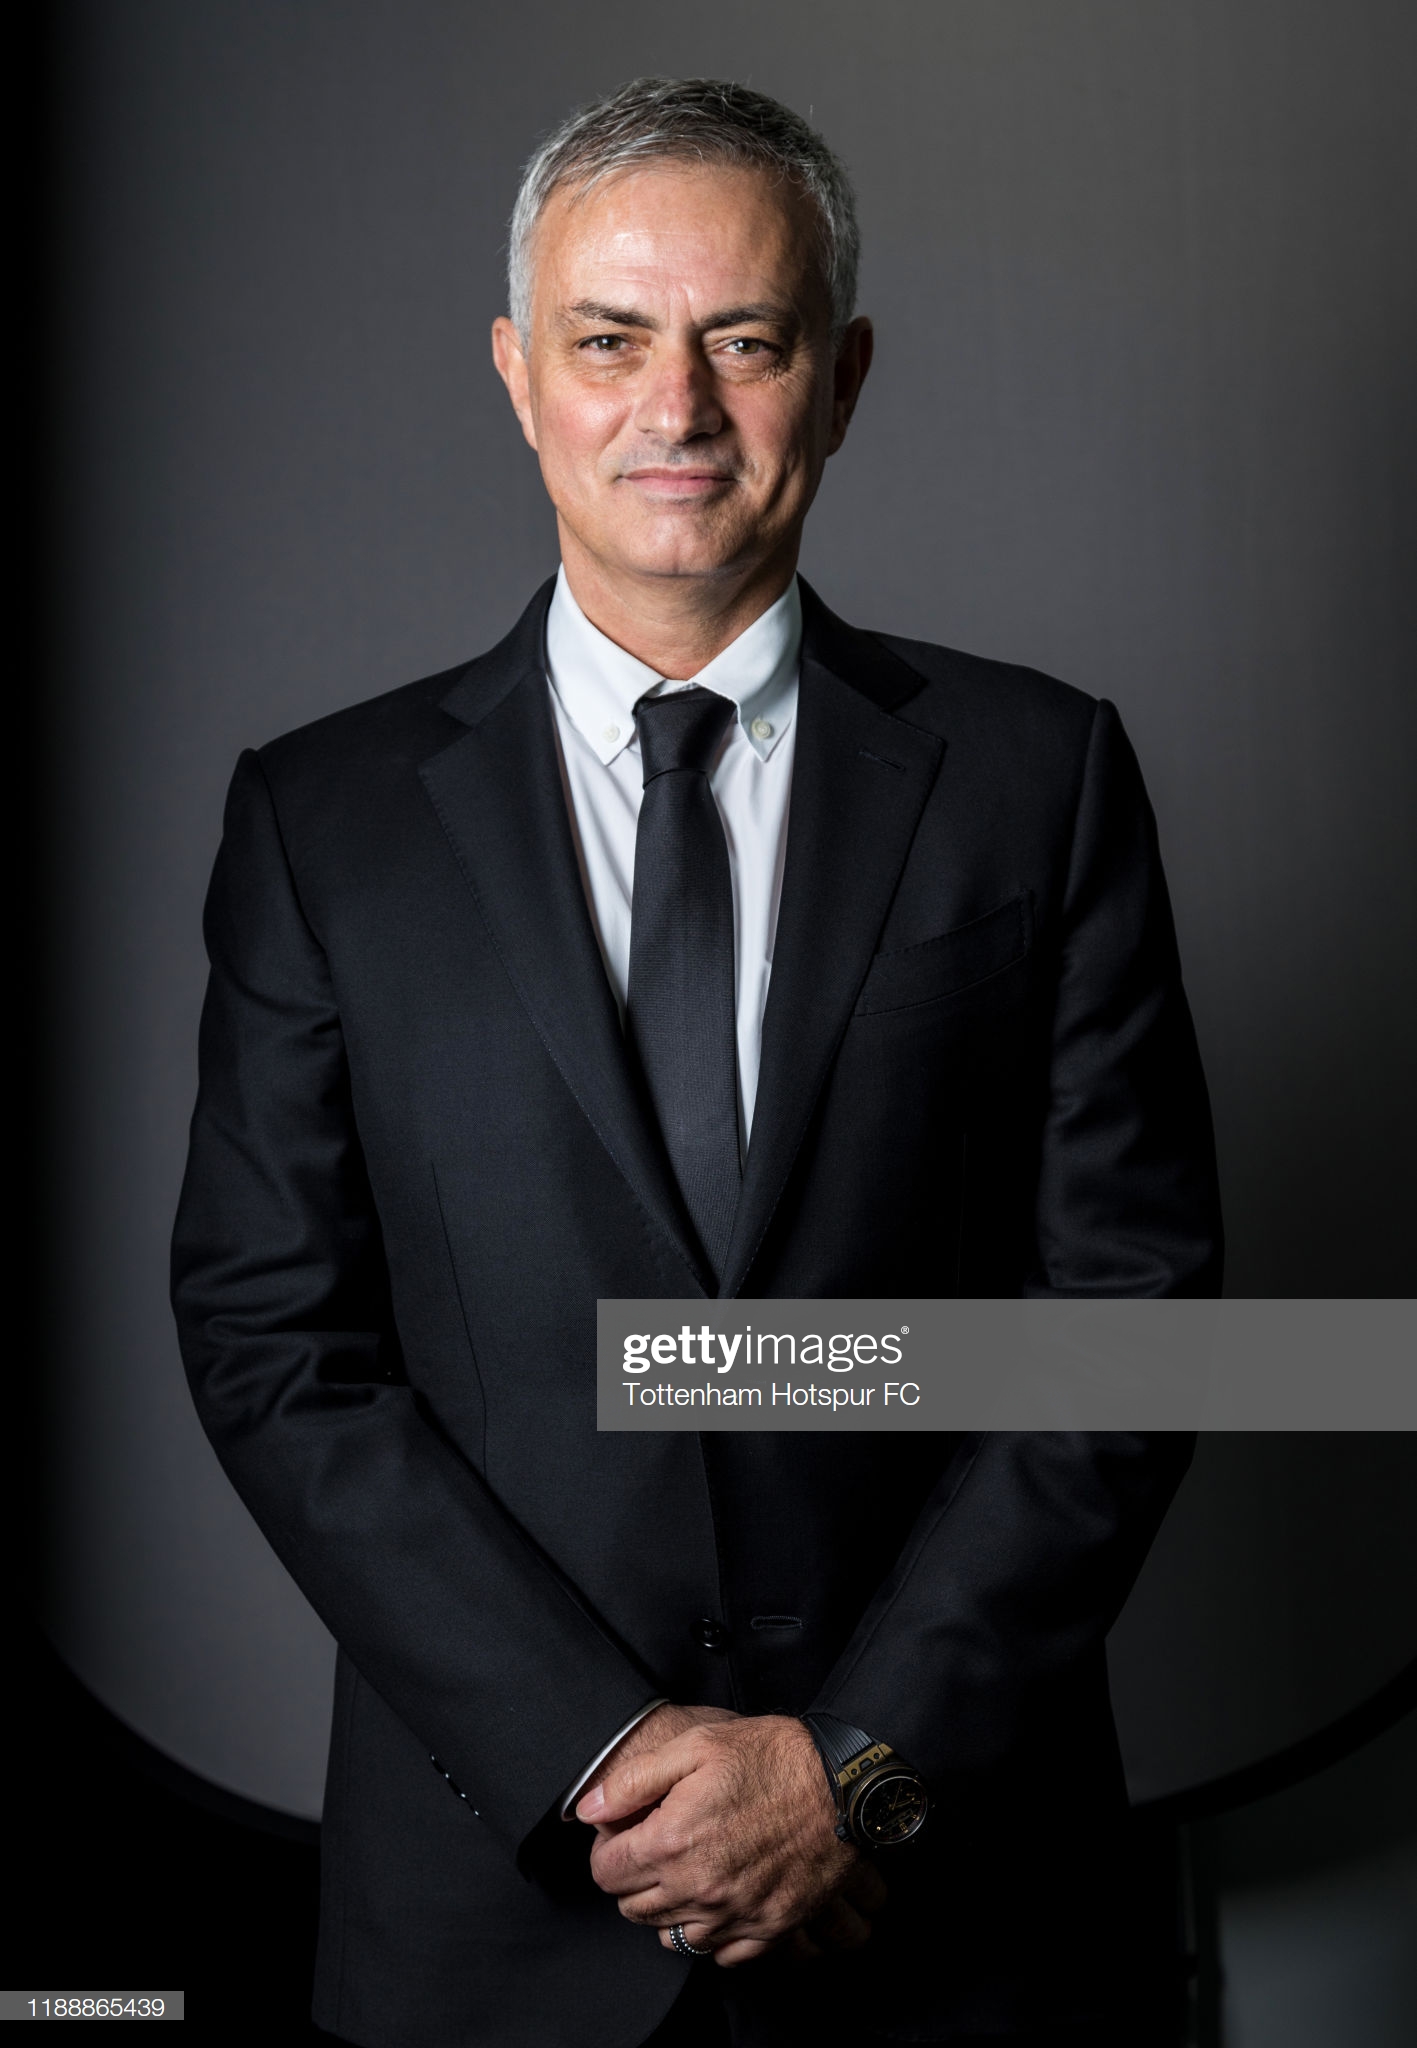 gettyimages-1188865439-2048x2048.jpg